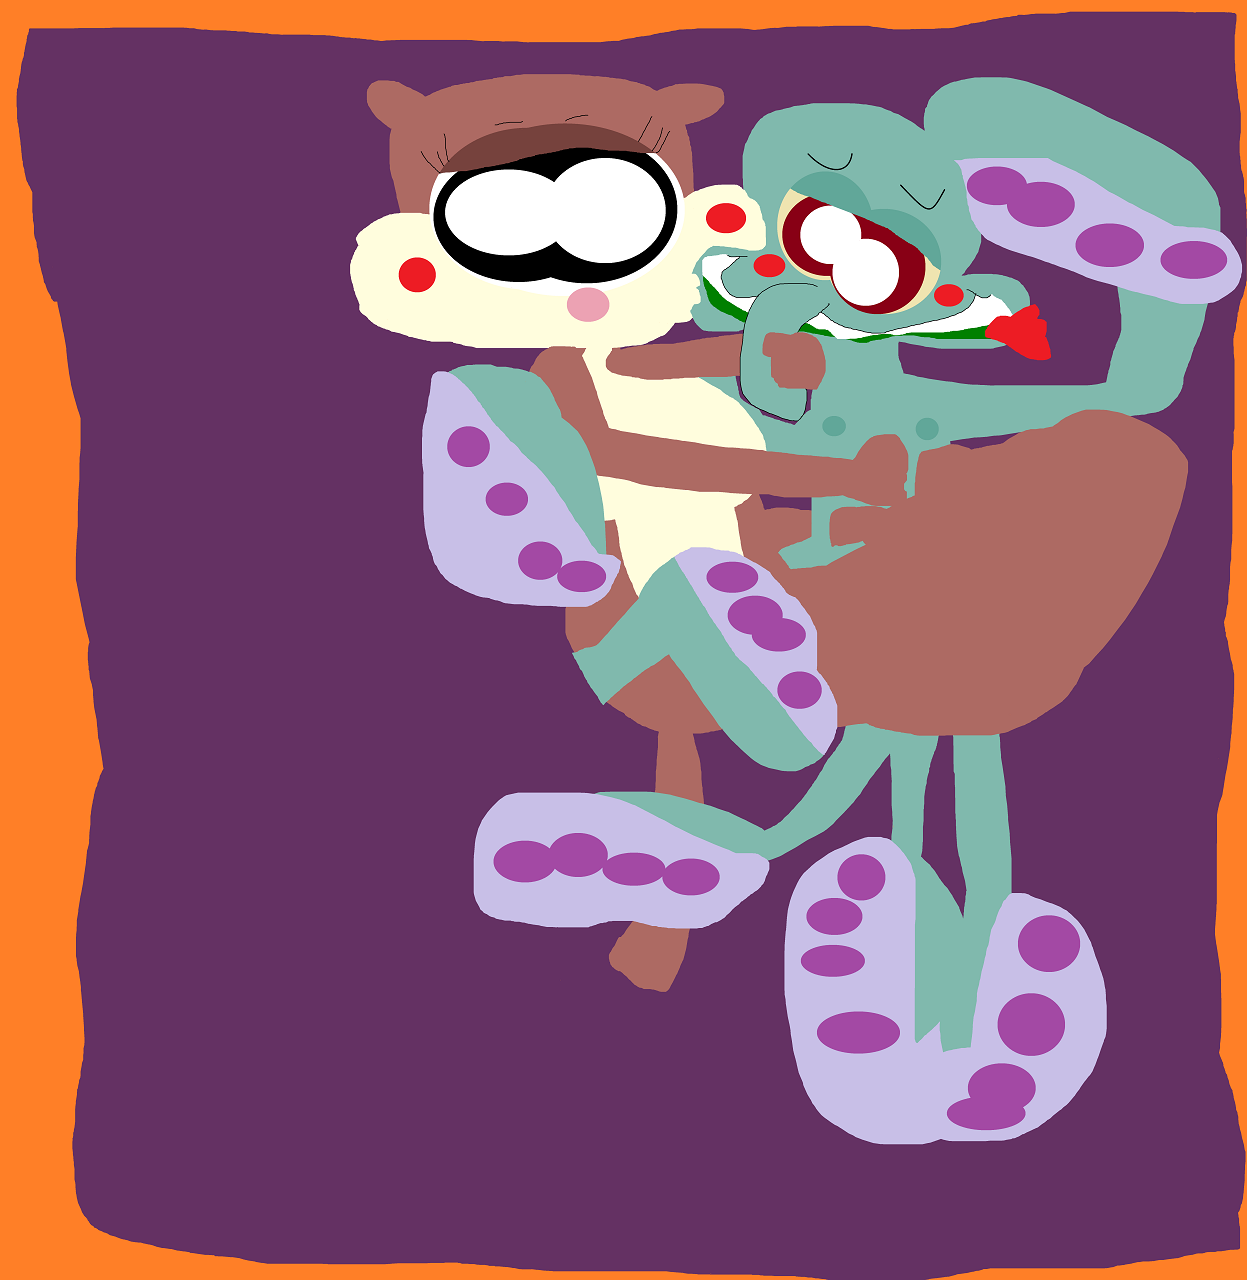 Squidward And Sandy Getting Frisky In Bed by Falconlobo